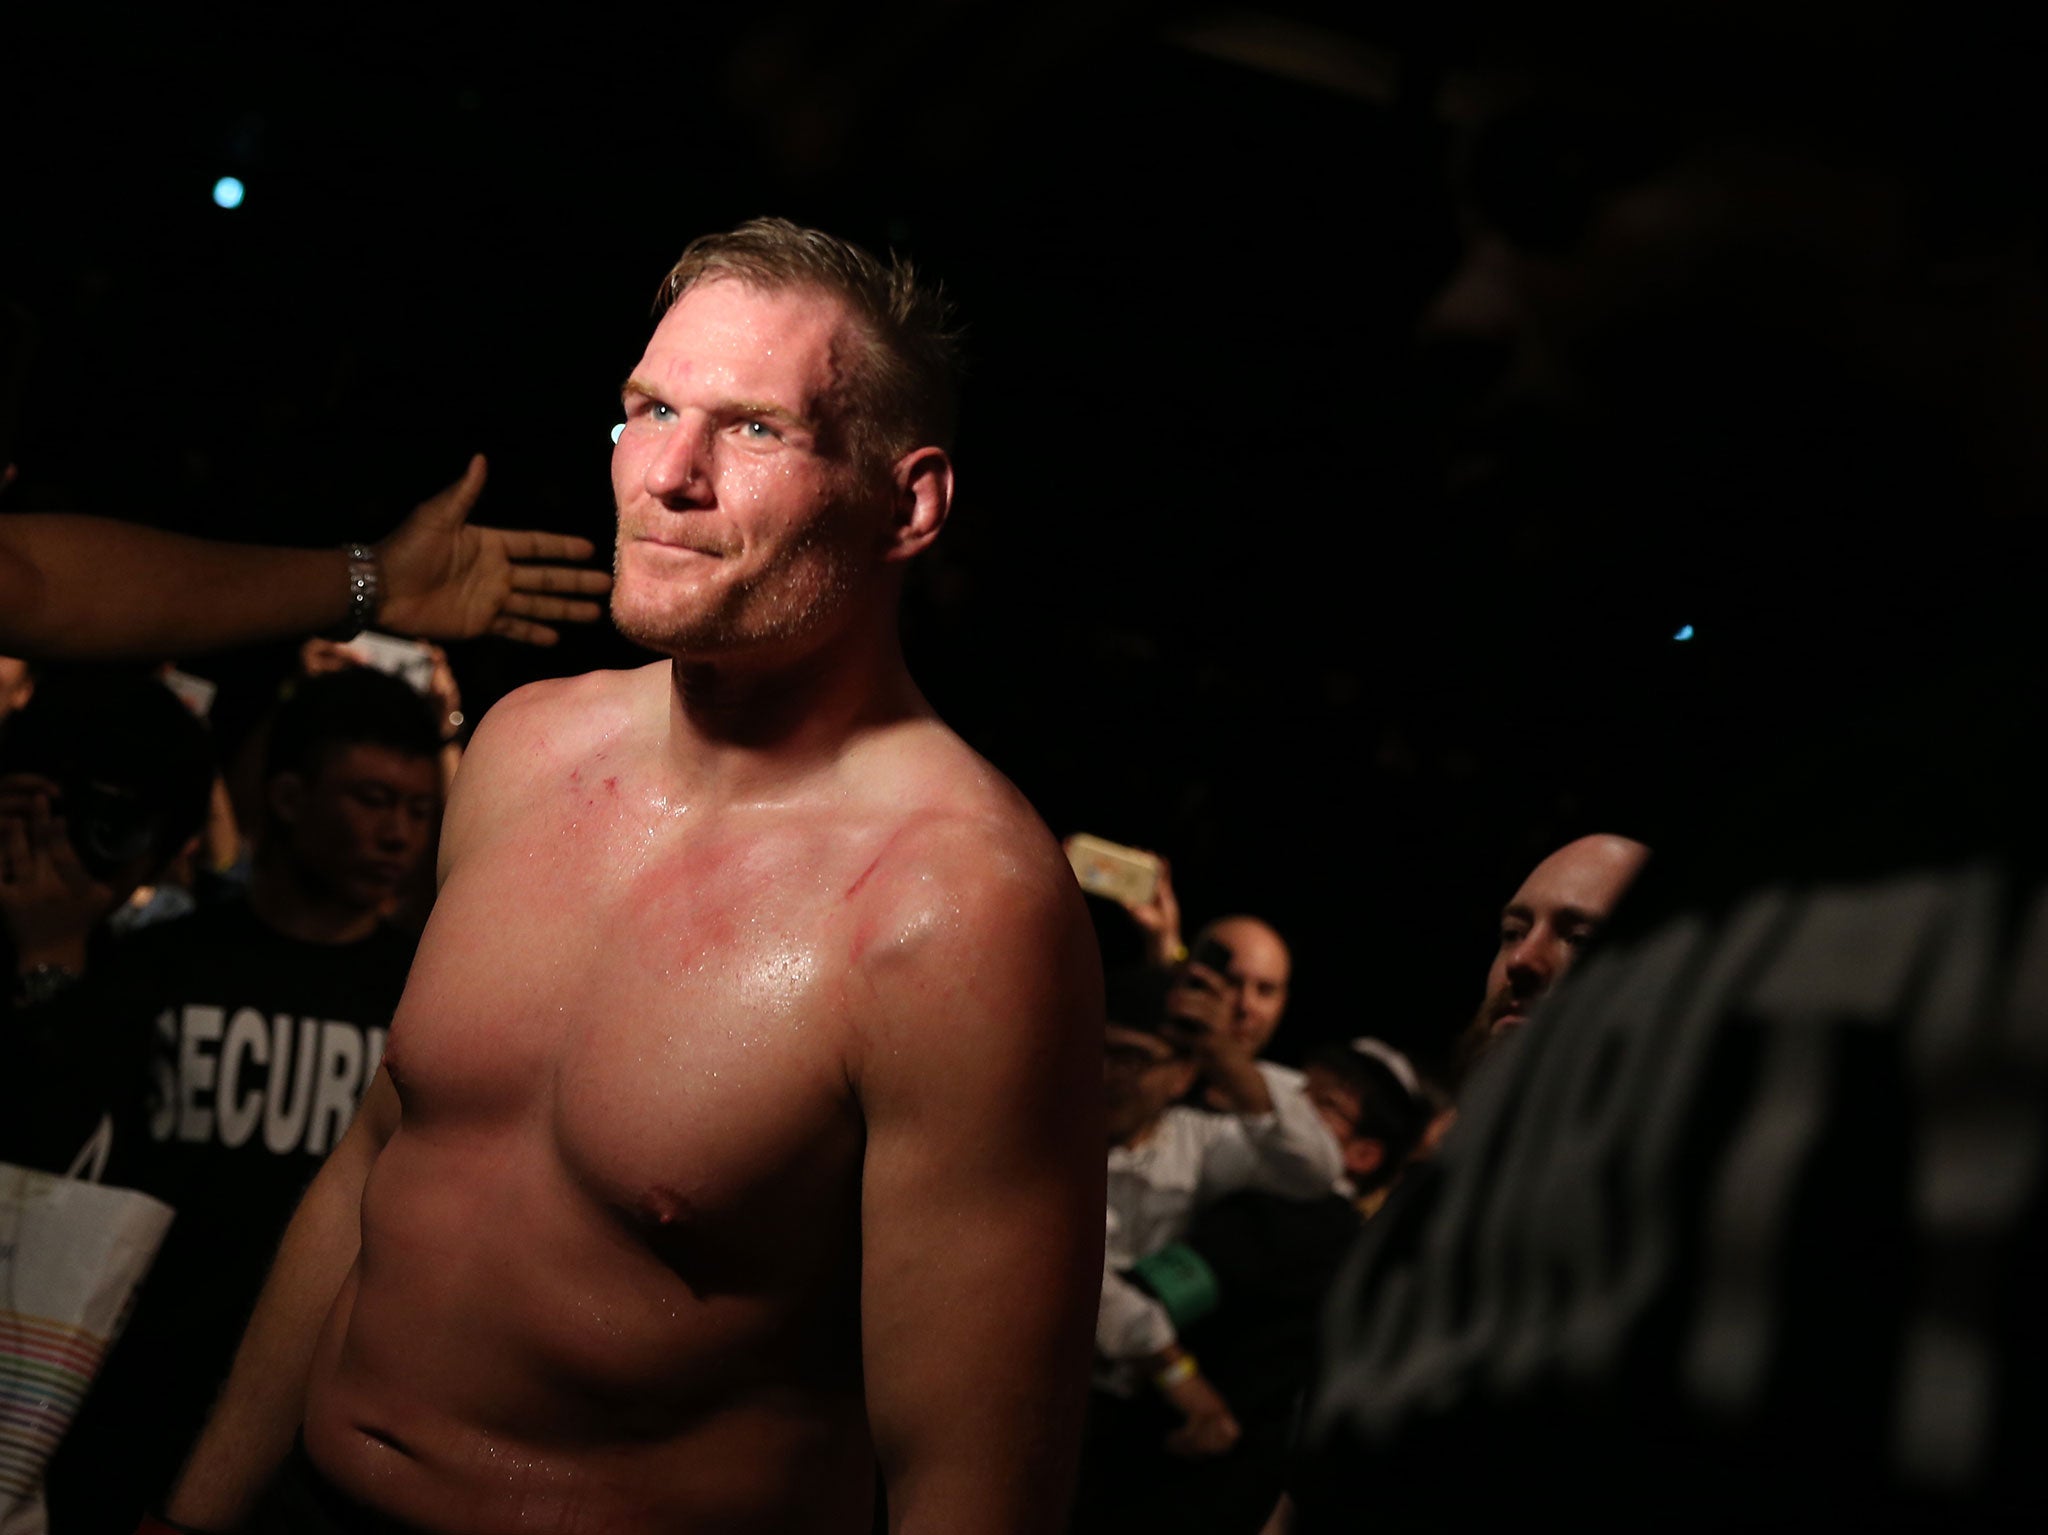 Josh Barnett is one of the best submission wrestlers in the world